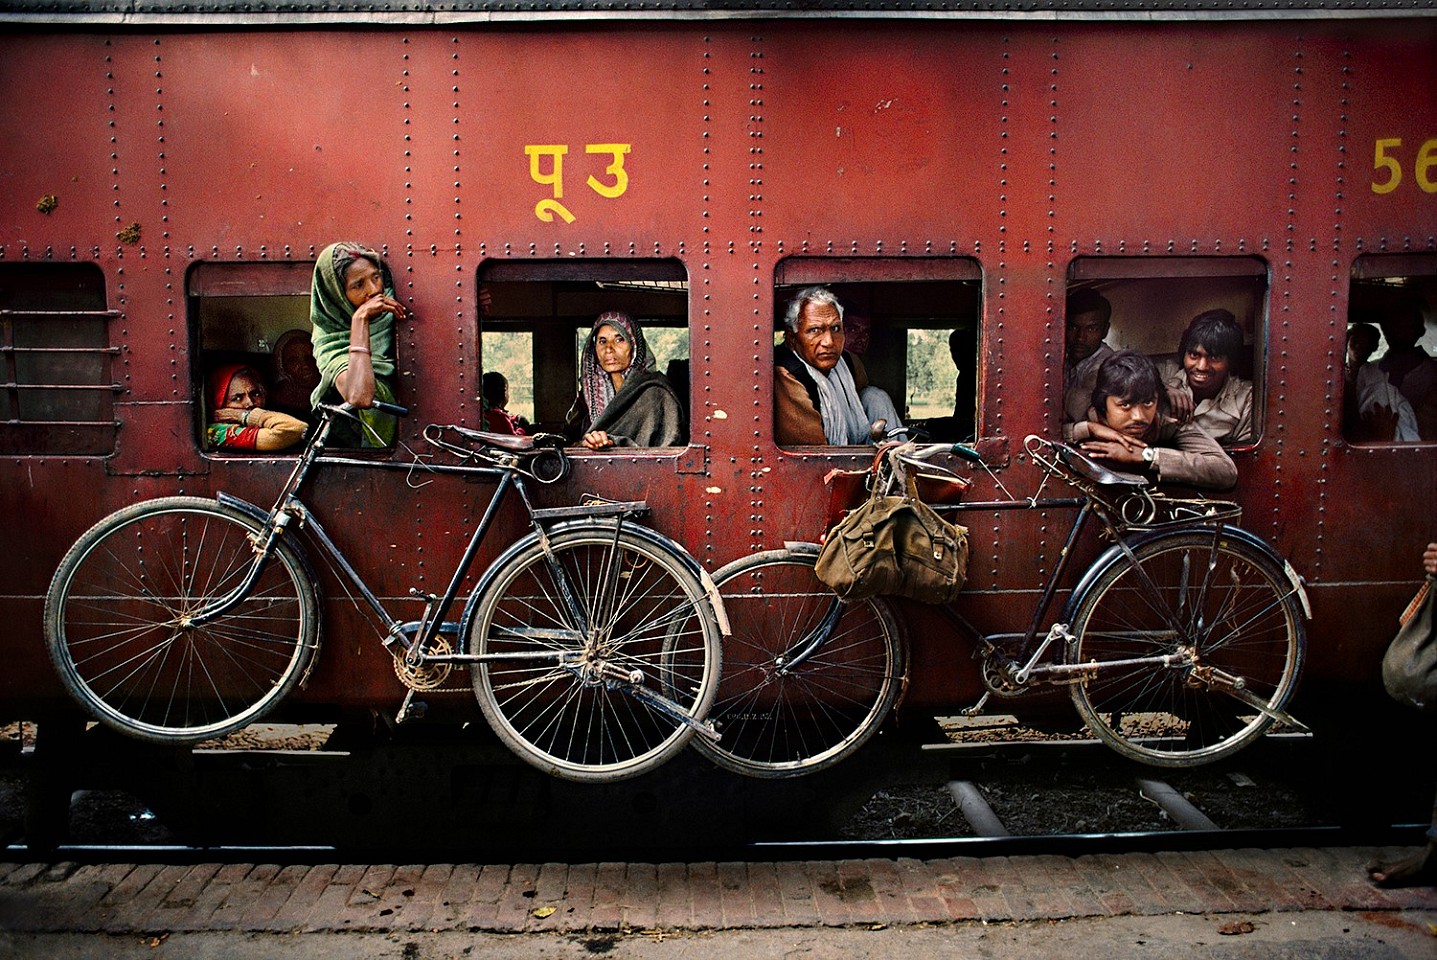 Steve McCurry, Bicycles on Side of Train
FujiFlex Crystal Archive Print, (Inquire for available sizes)
INDIA-11443